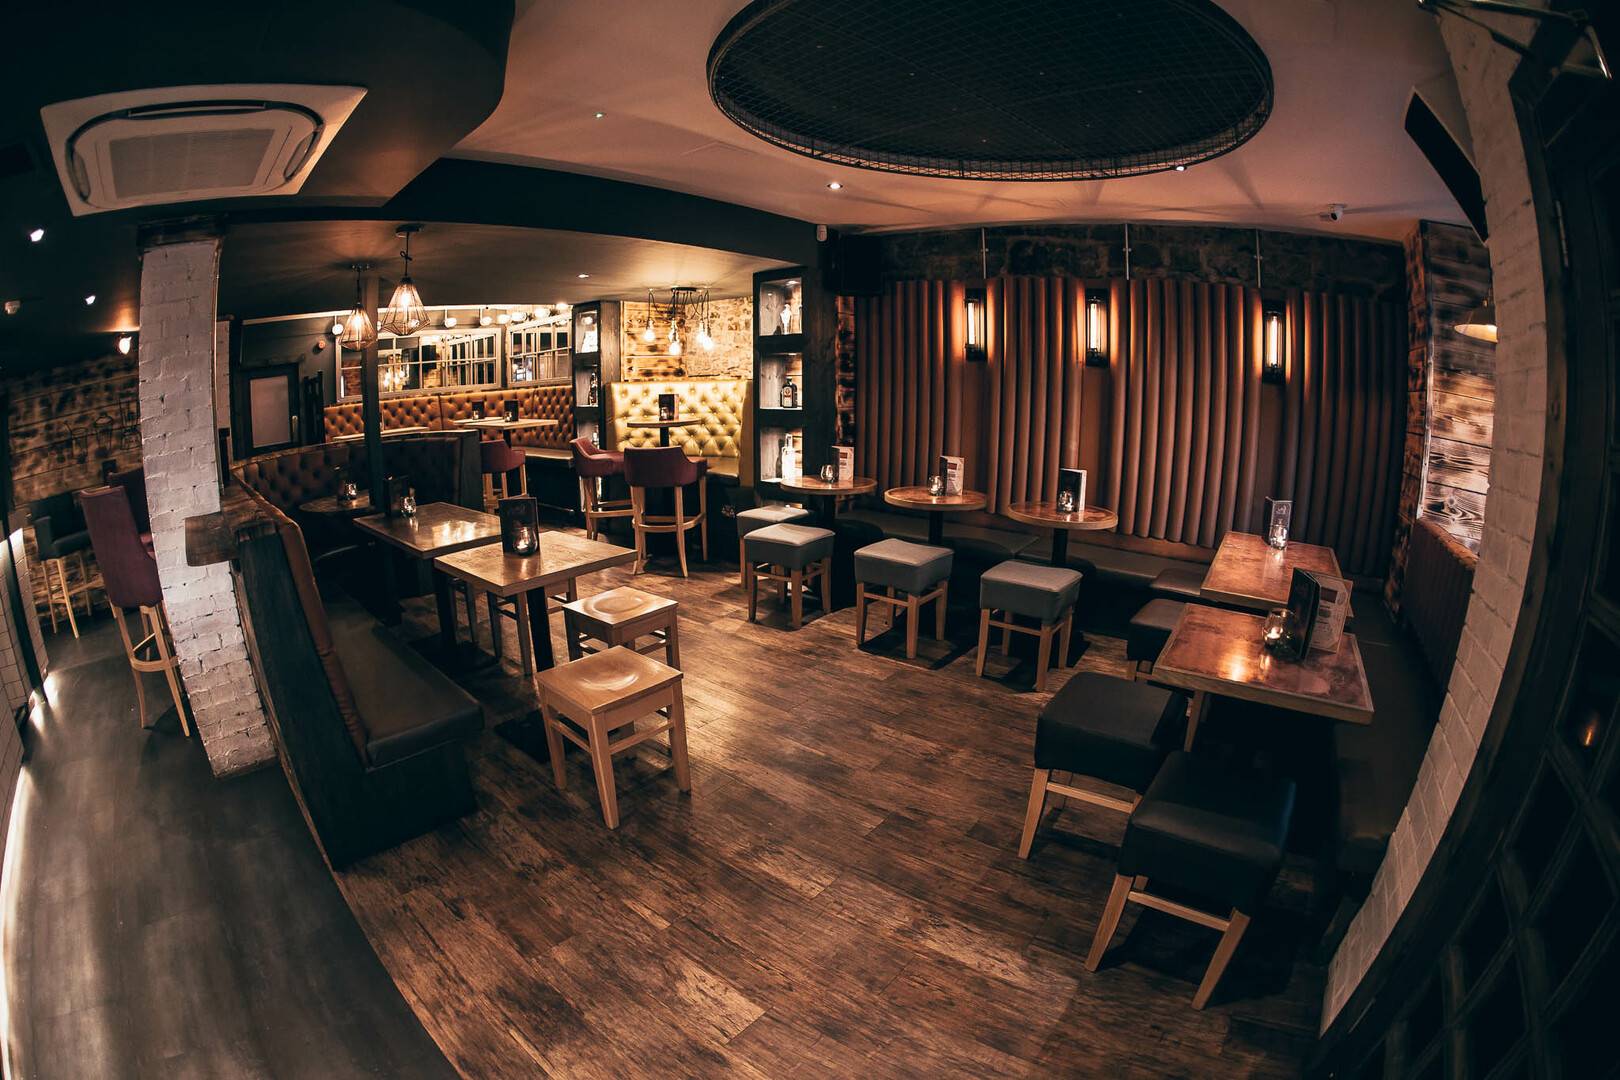 With spaces to suit all sizes of groups at Bar Tonic